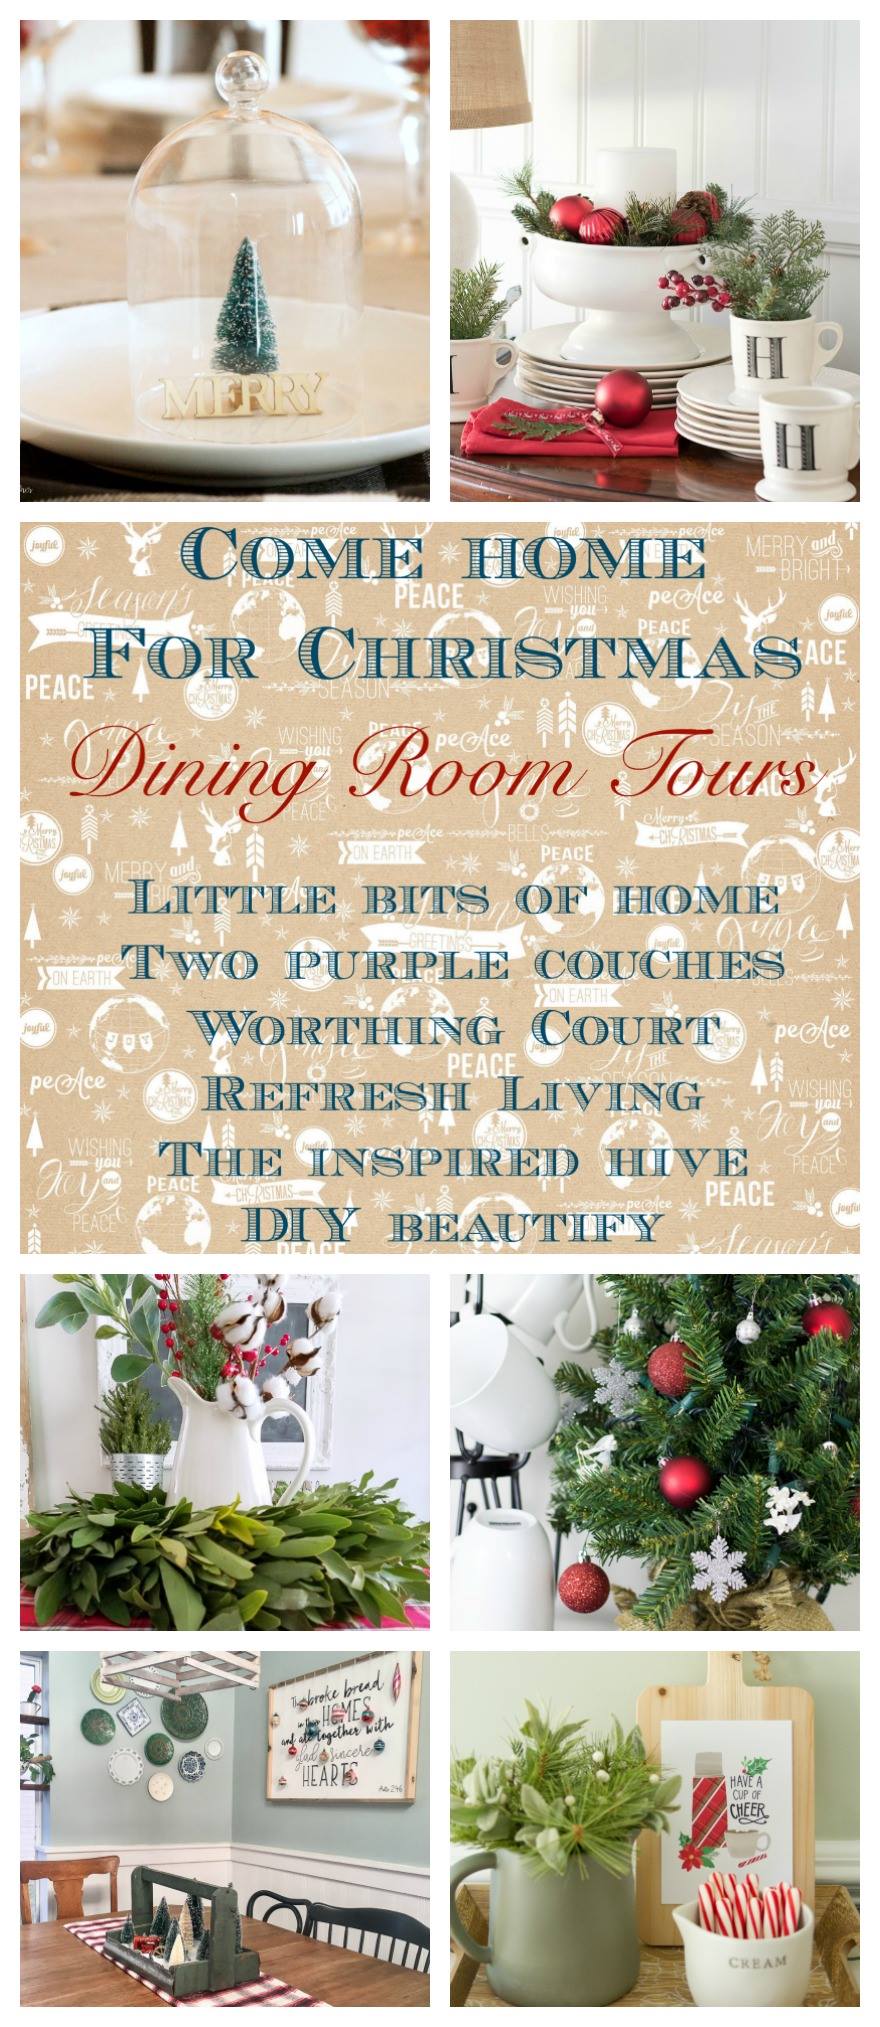 Come home for Christmas Dining Rooms